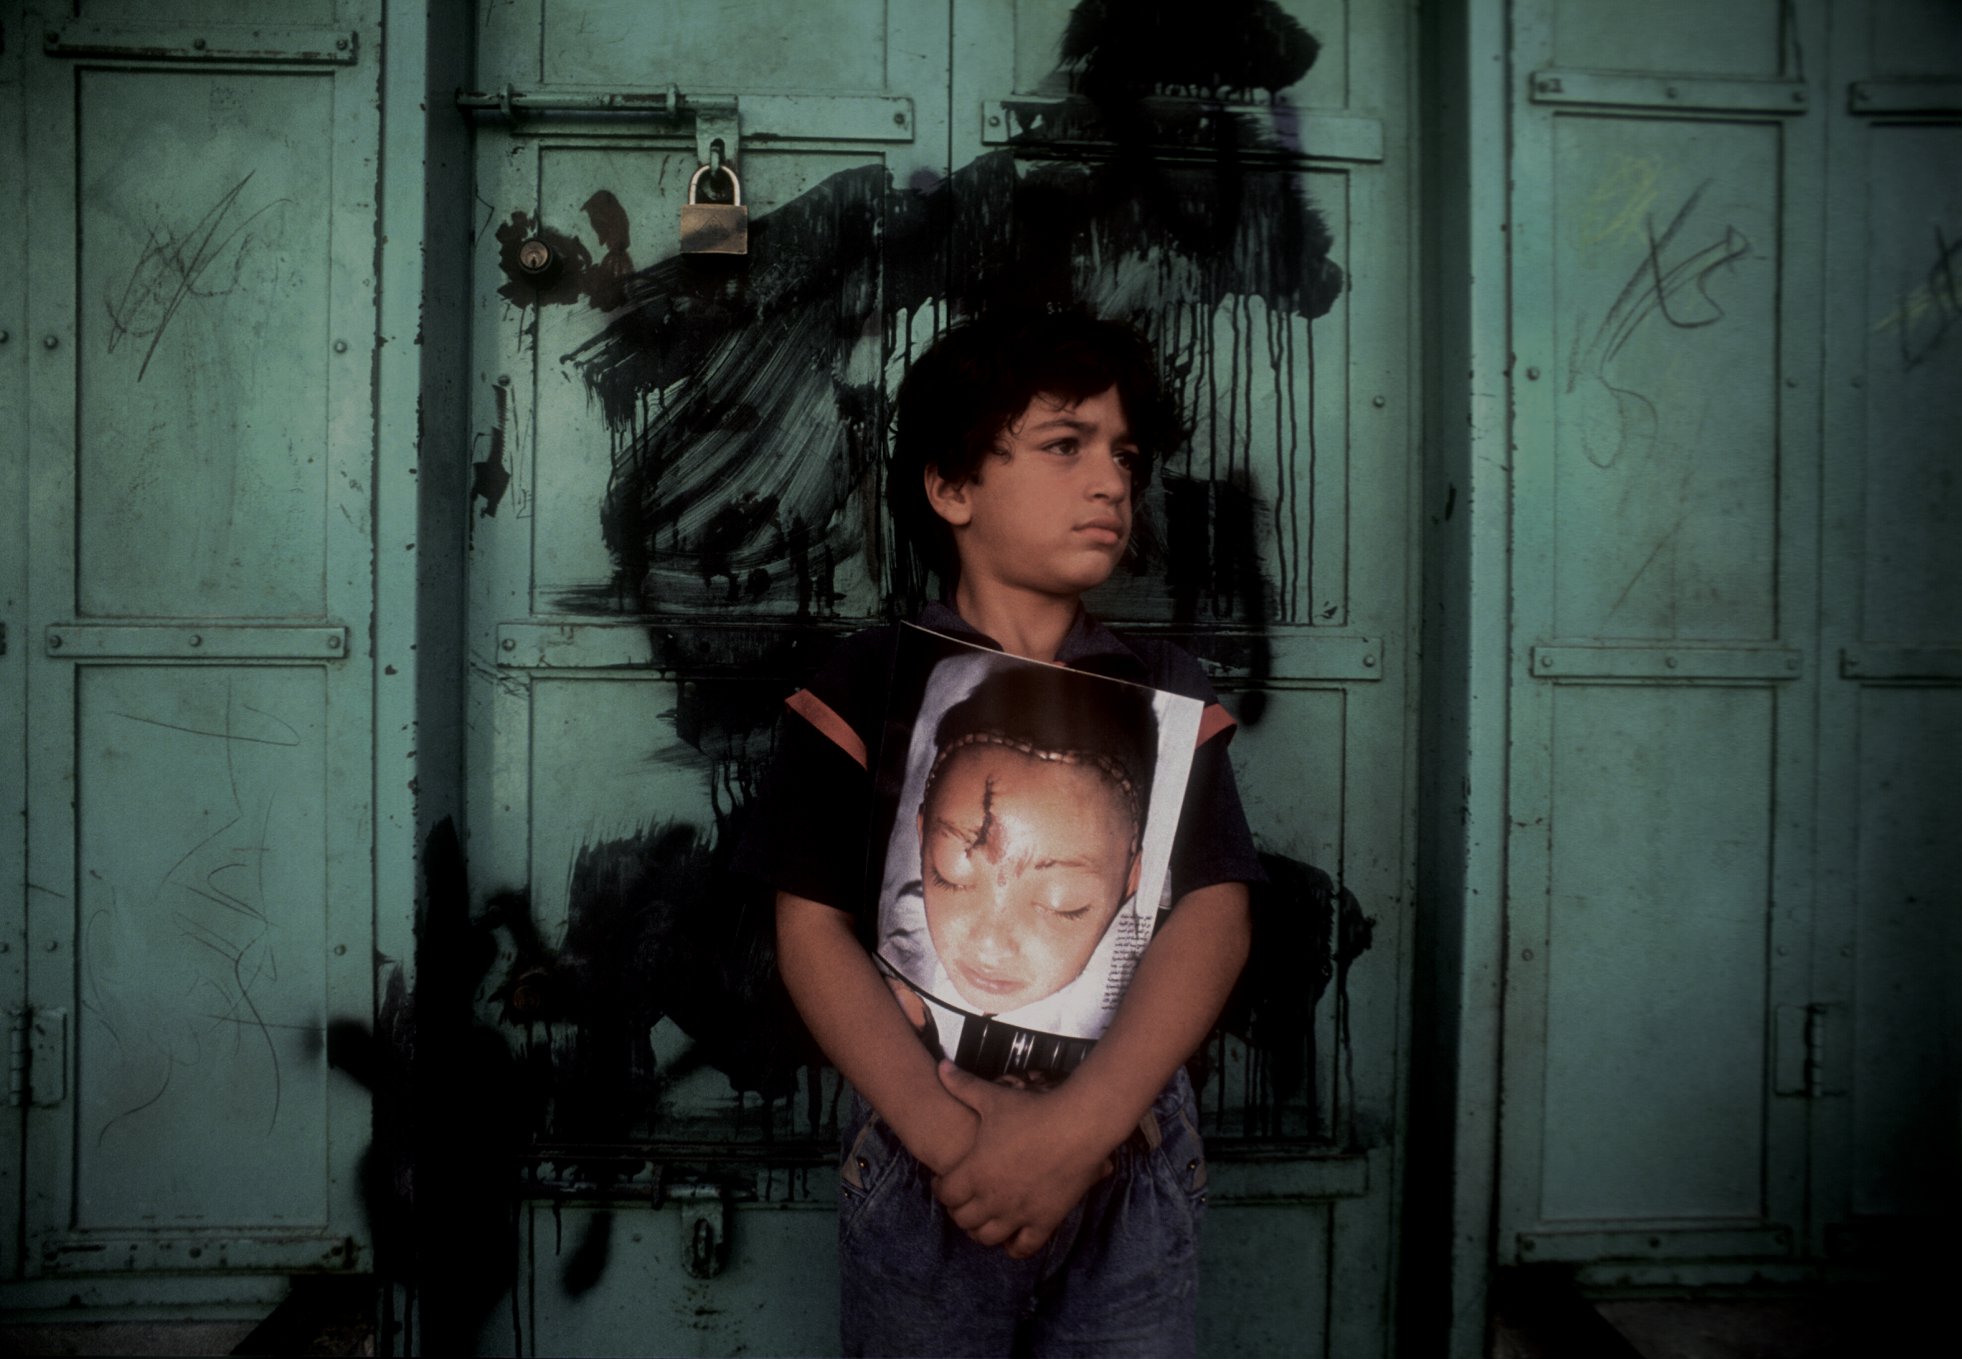  Portrait of his sister killed during the First Intifada.   
  
&nbsp;  
  
    
  
&nbsp;  Normal 
&nbsp;  0 
&nbsp;  
&nbsp;  
&nbsp;  
&nbsp;  
&nbsp;  false 
&nbsp;  false 
&nbsp;  false 
&nbsp;  
&nbsp;  en-US-POSIX 
&nbsp;  JA 
&nbsp;  X-NONE 
